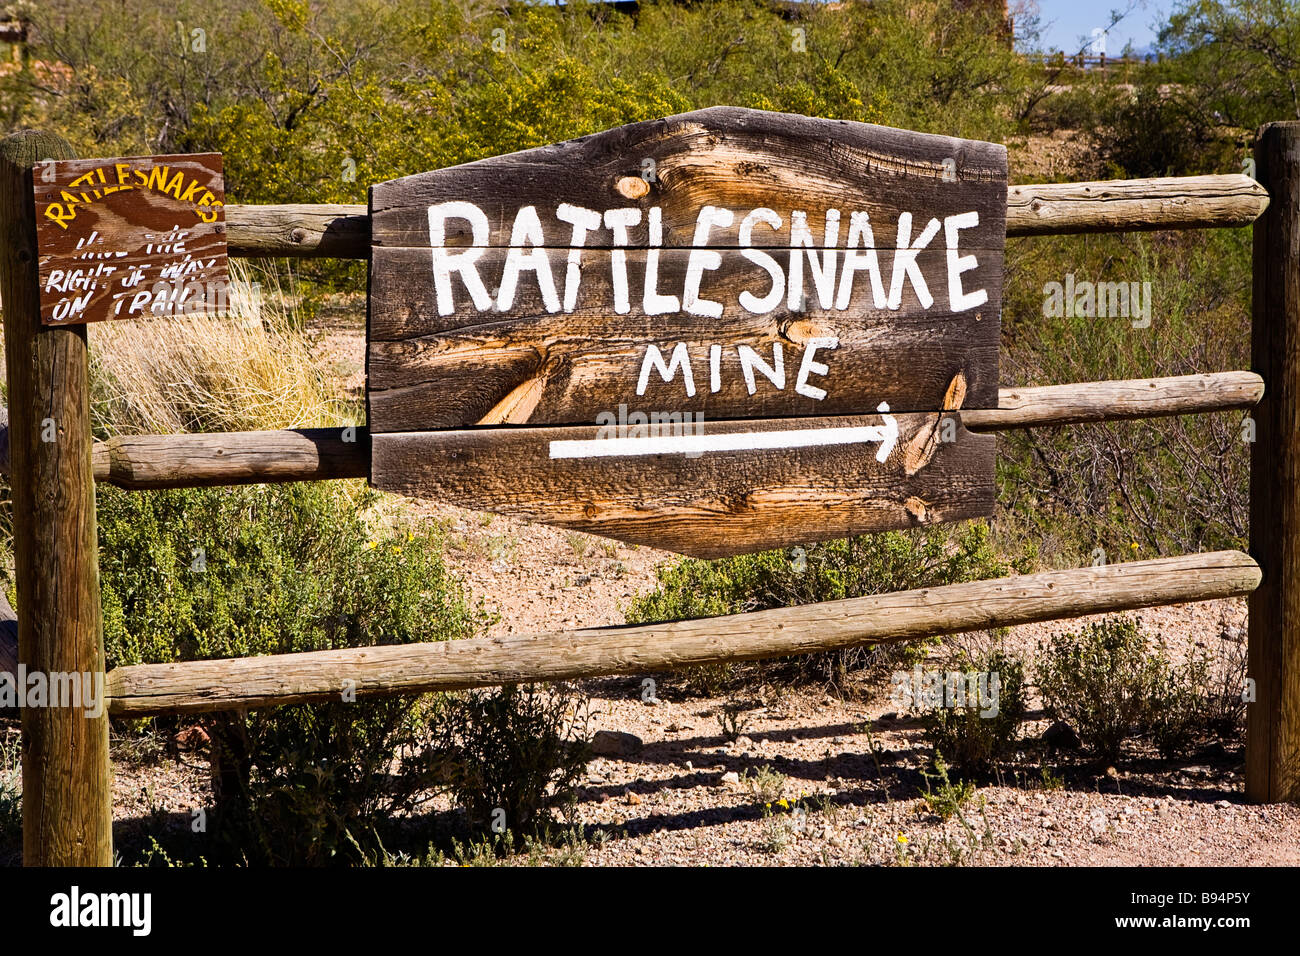 Image of the sign marking the trailhead for the Rattle Snake Mine area at Old Tucson Arizona Stock Photo